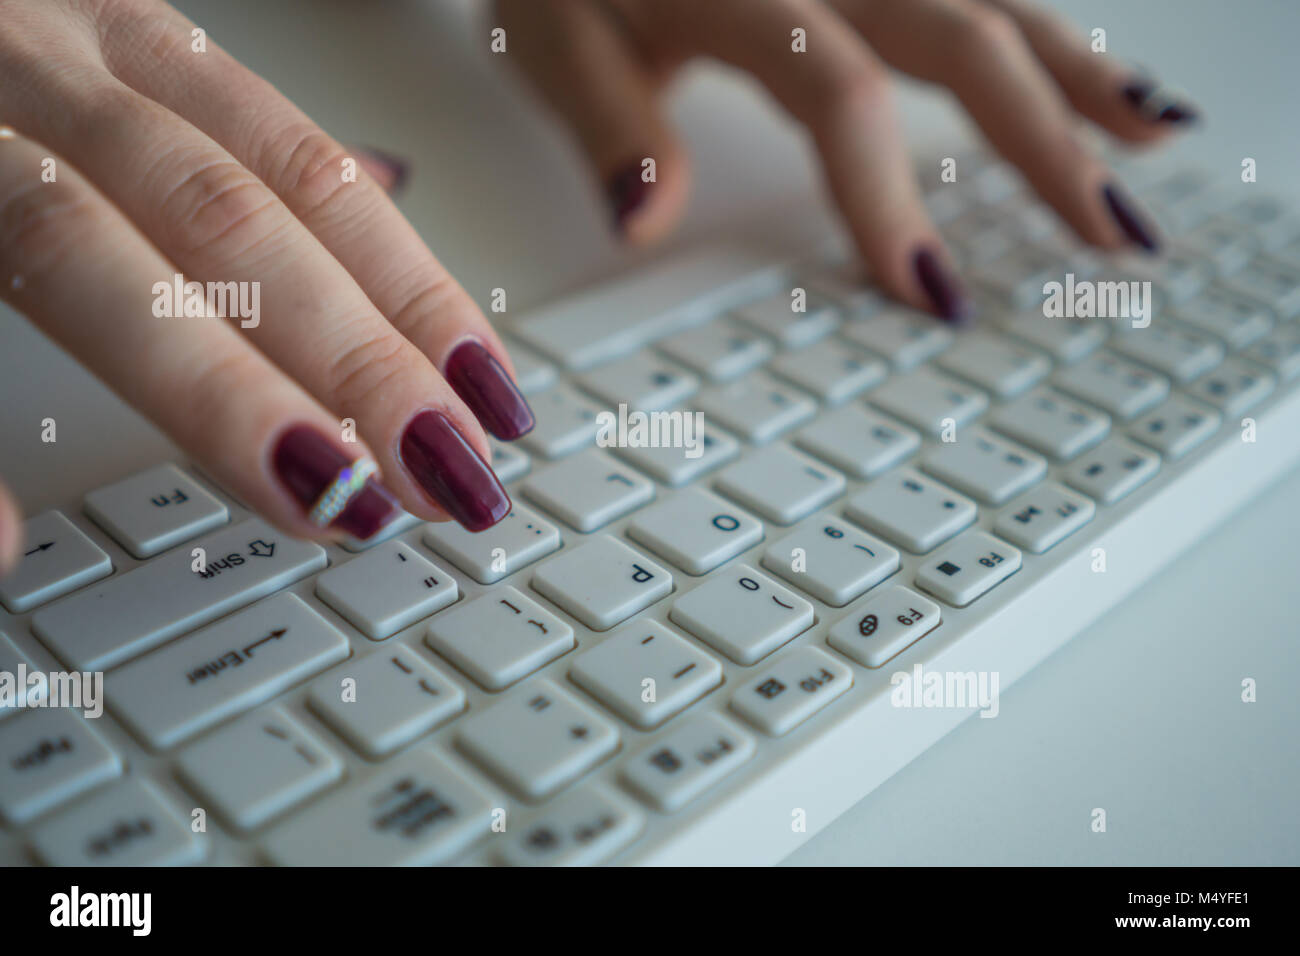 Business woman is typing text on a computer keyboard. Stock Photo